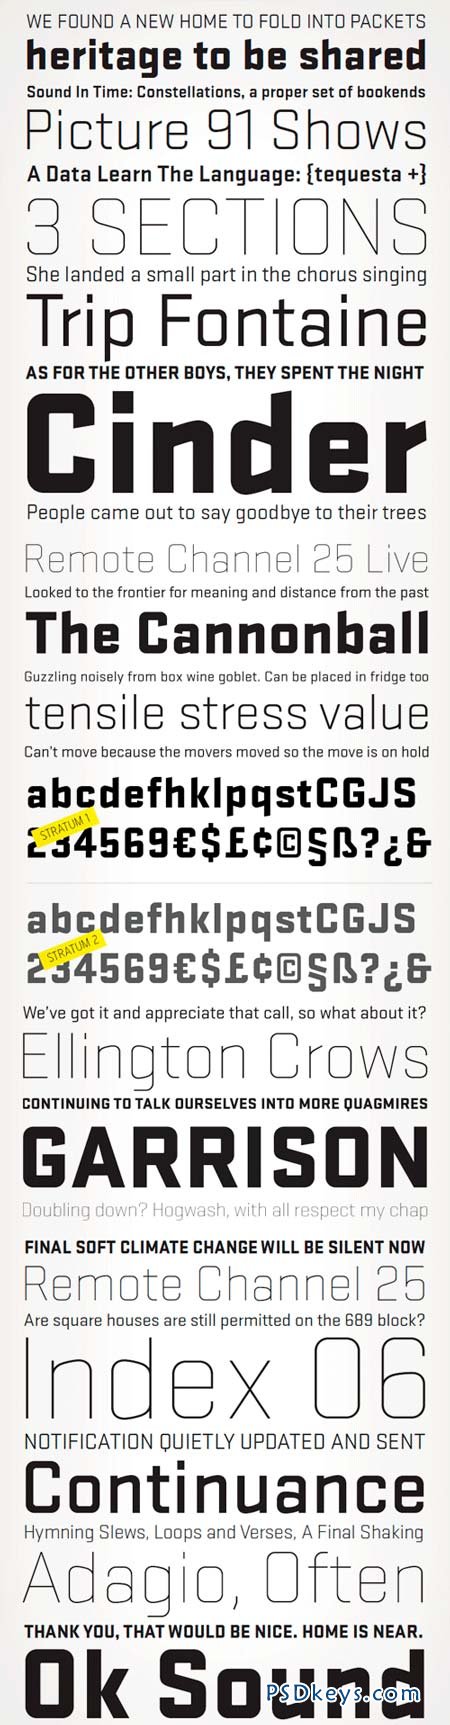 Stratum 1 & 2 Fonts Family - 12 Fonts for $179